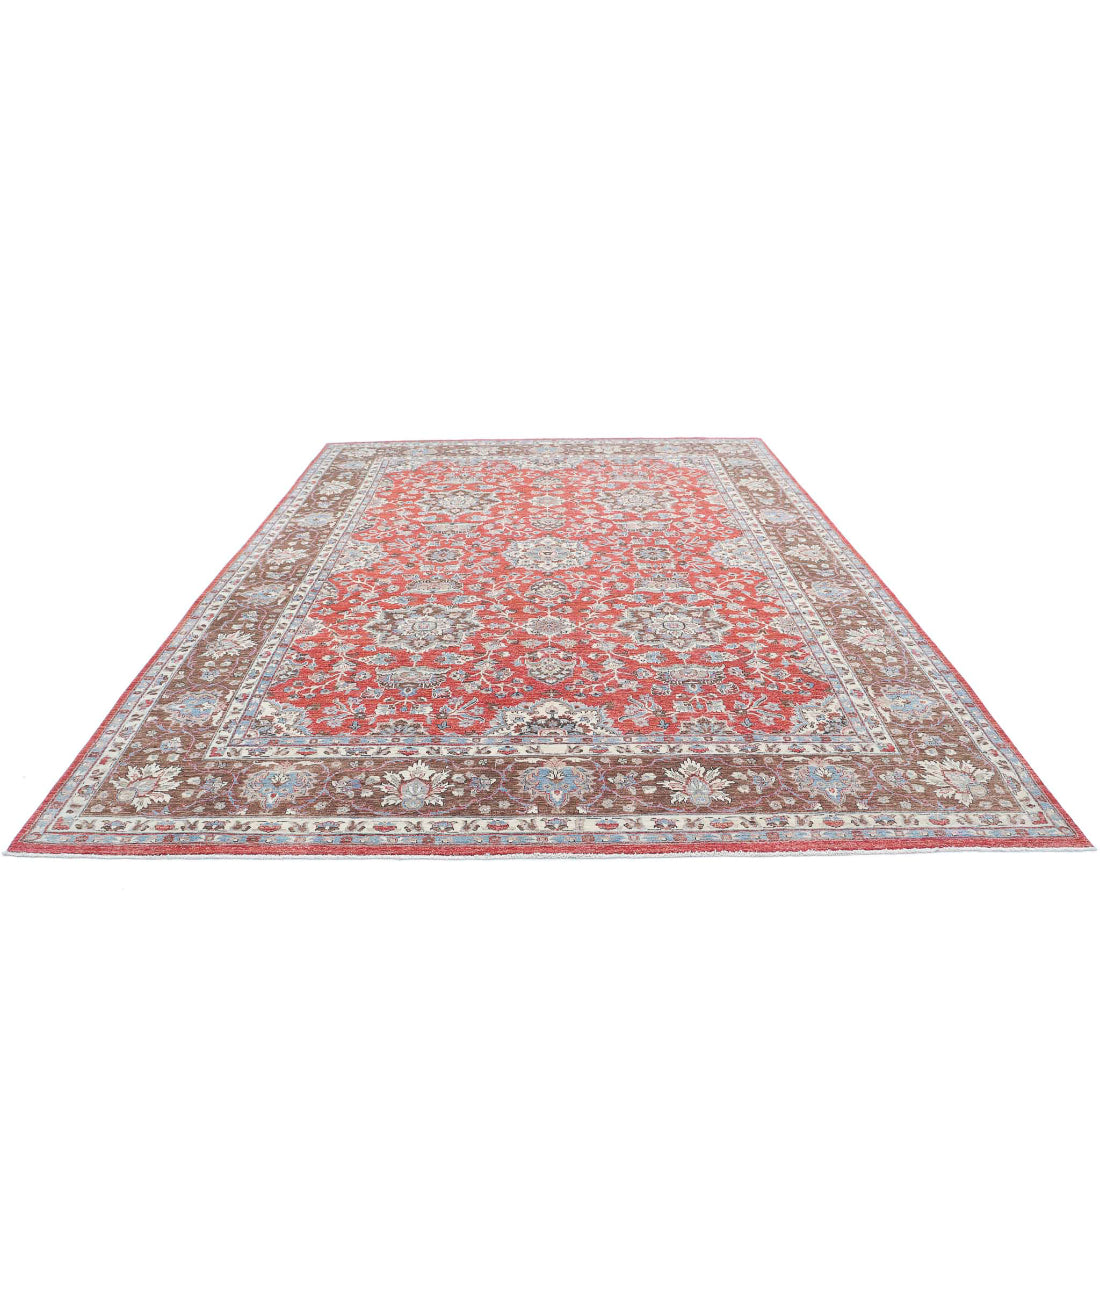 Ziegler 9'6'' X 12'3'' Hand-Knotted Wool Rug 9'6'' x 12'3'' (285 X 368) / Rust / Brown